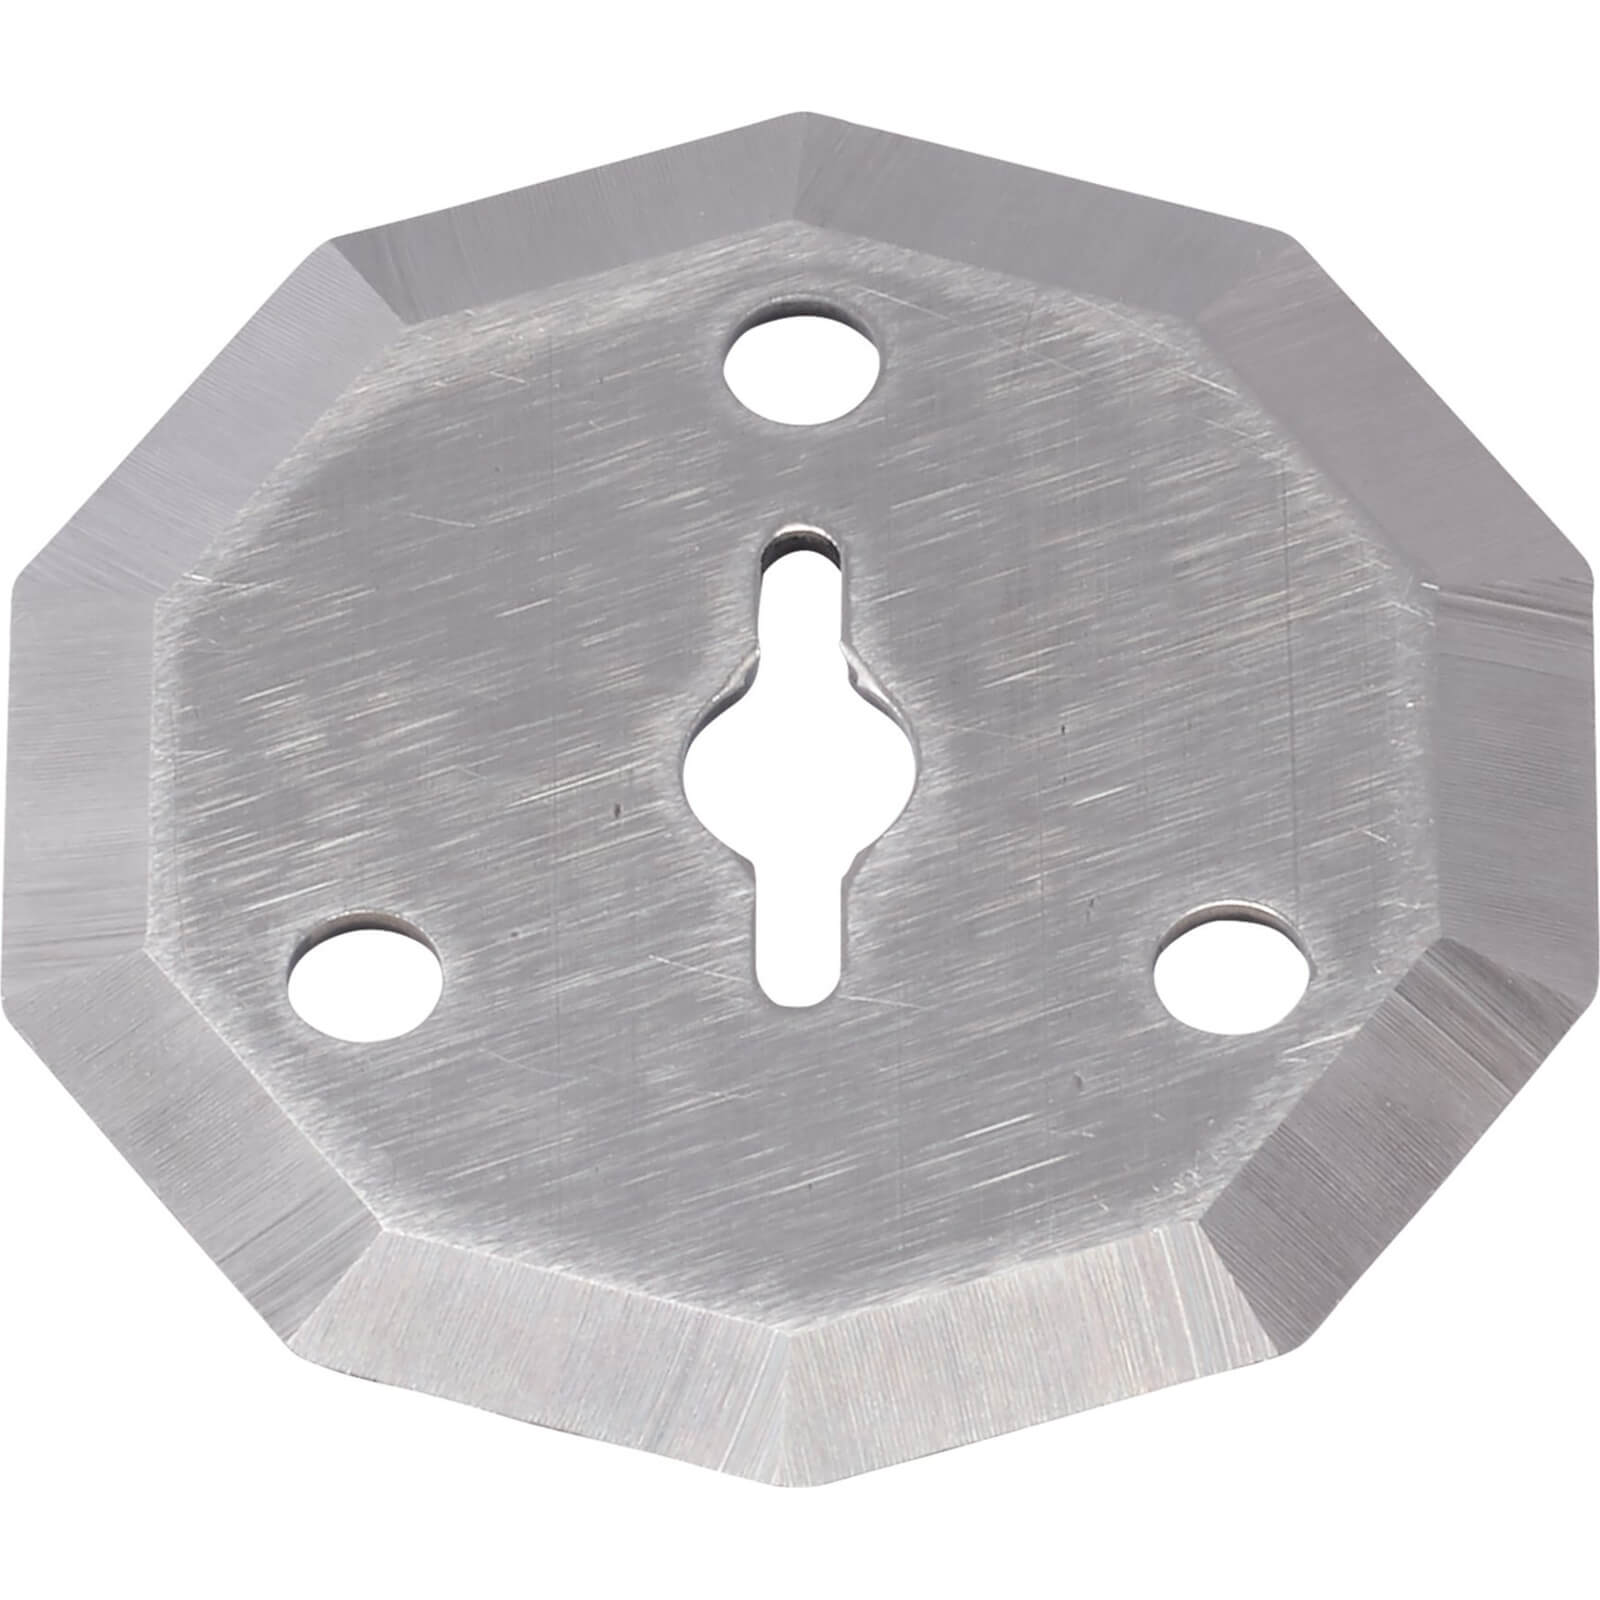 Draper Replacement Blade for 19403 Screwdriver and Cutting Tool